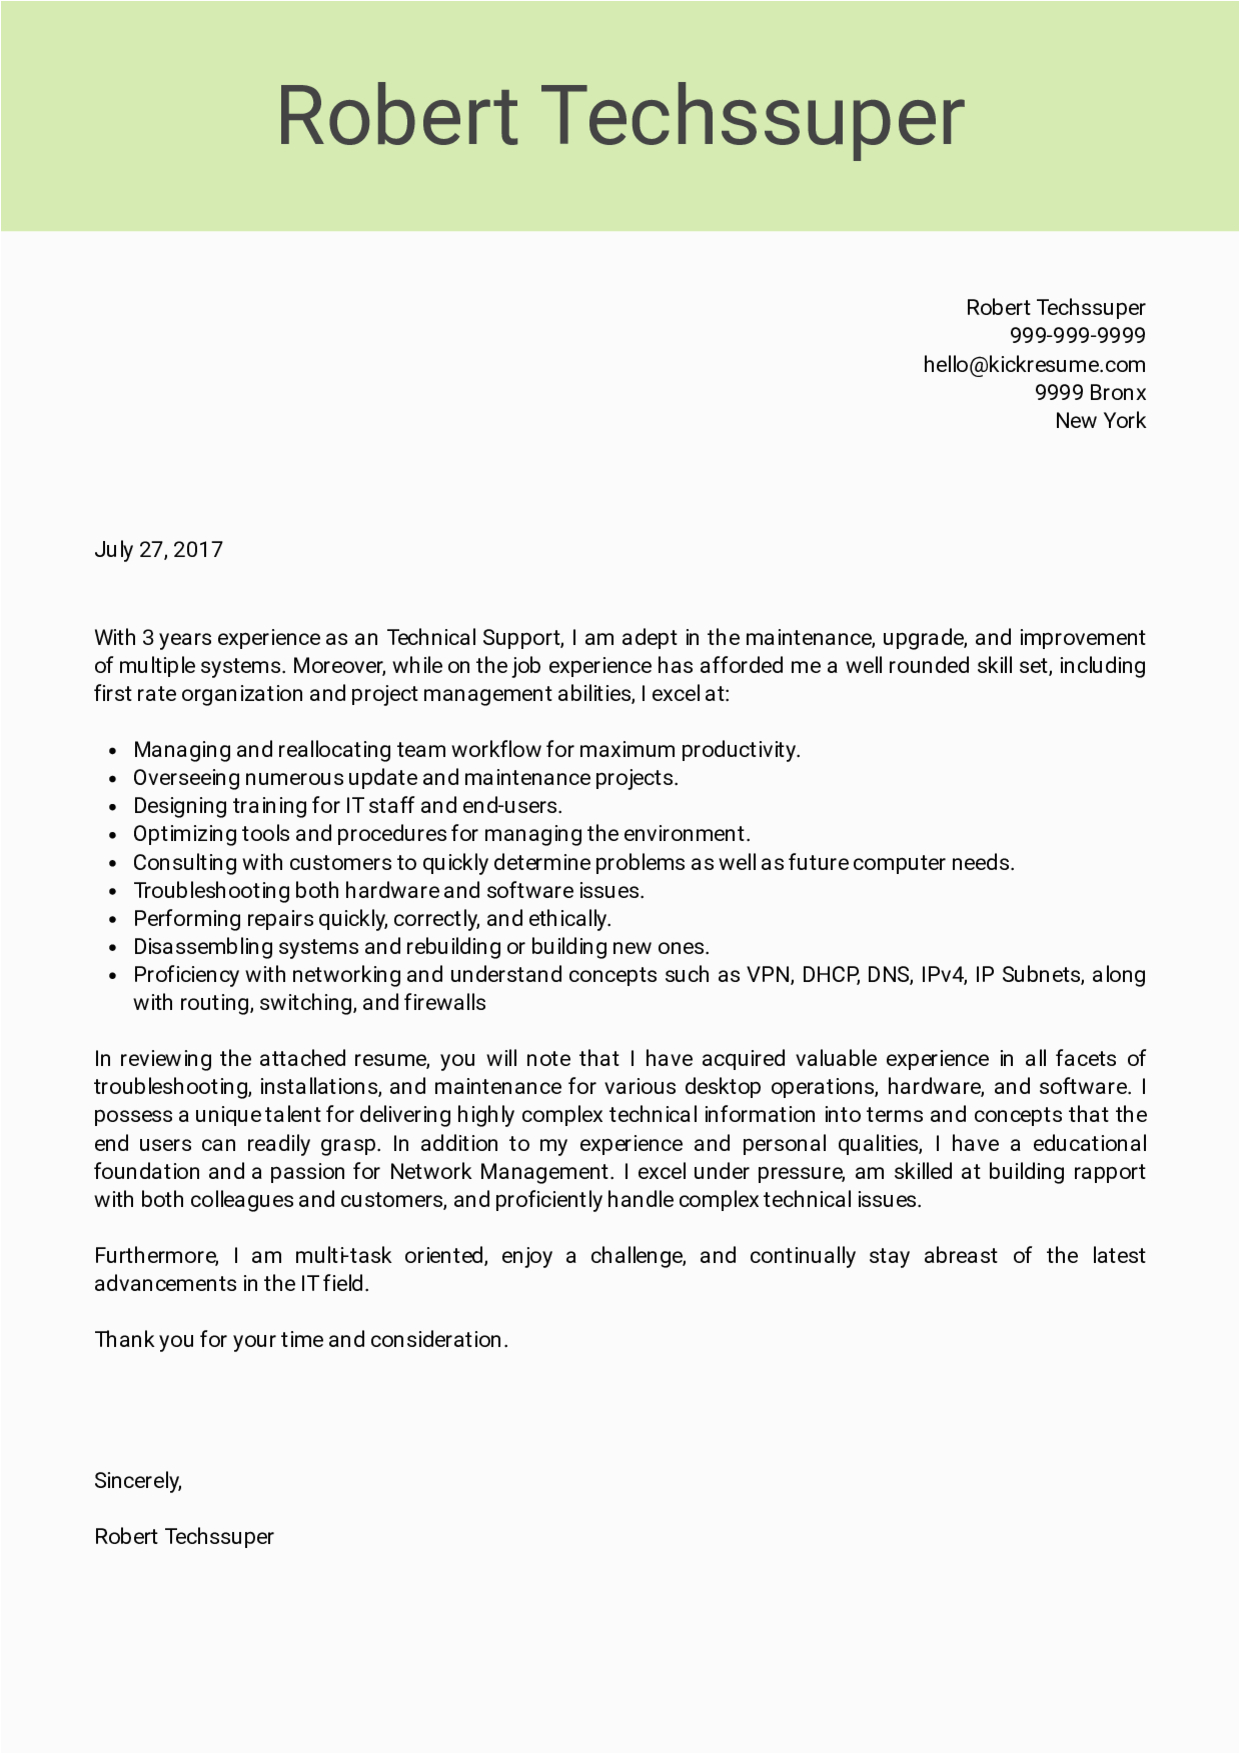 Sample Of Cover Letter for Resume without Experience Cover Letter Sample without Experience Cover Resume